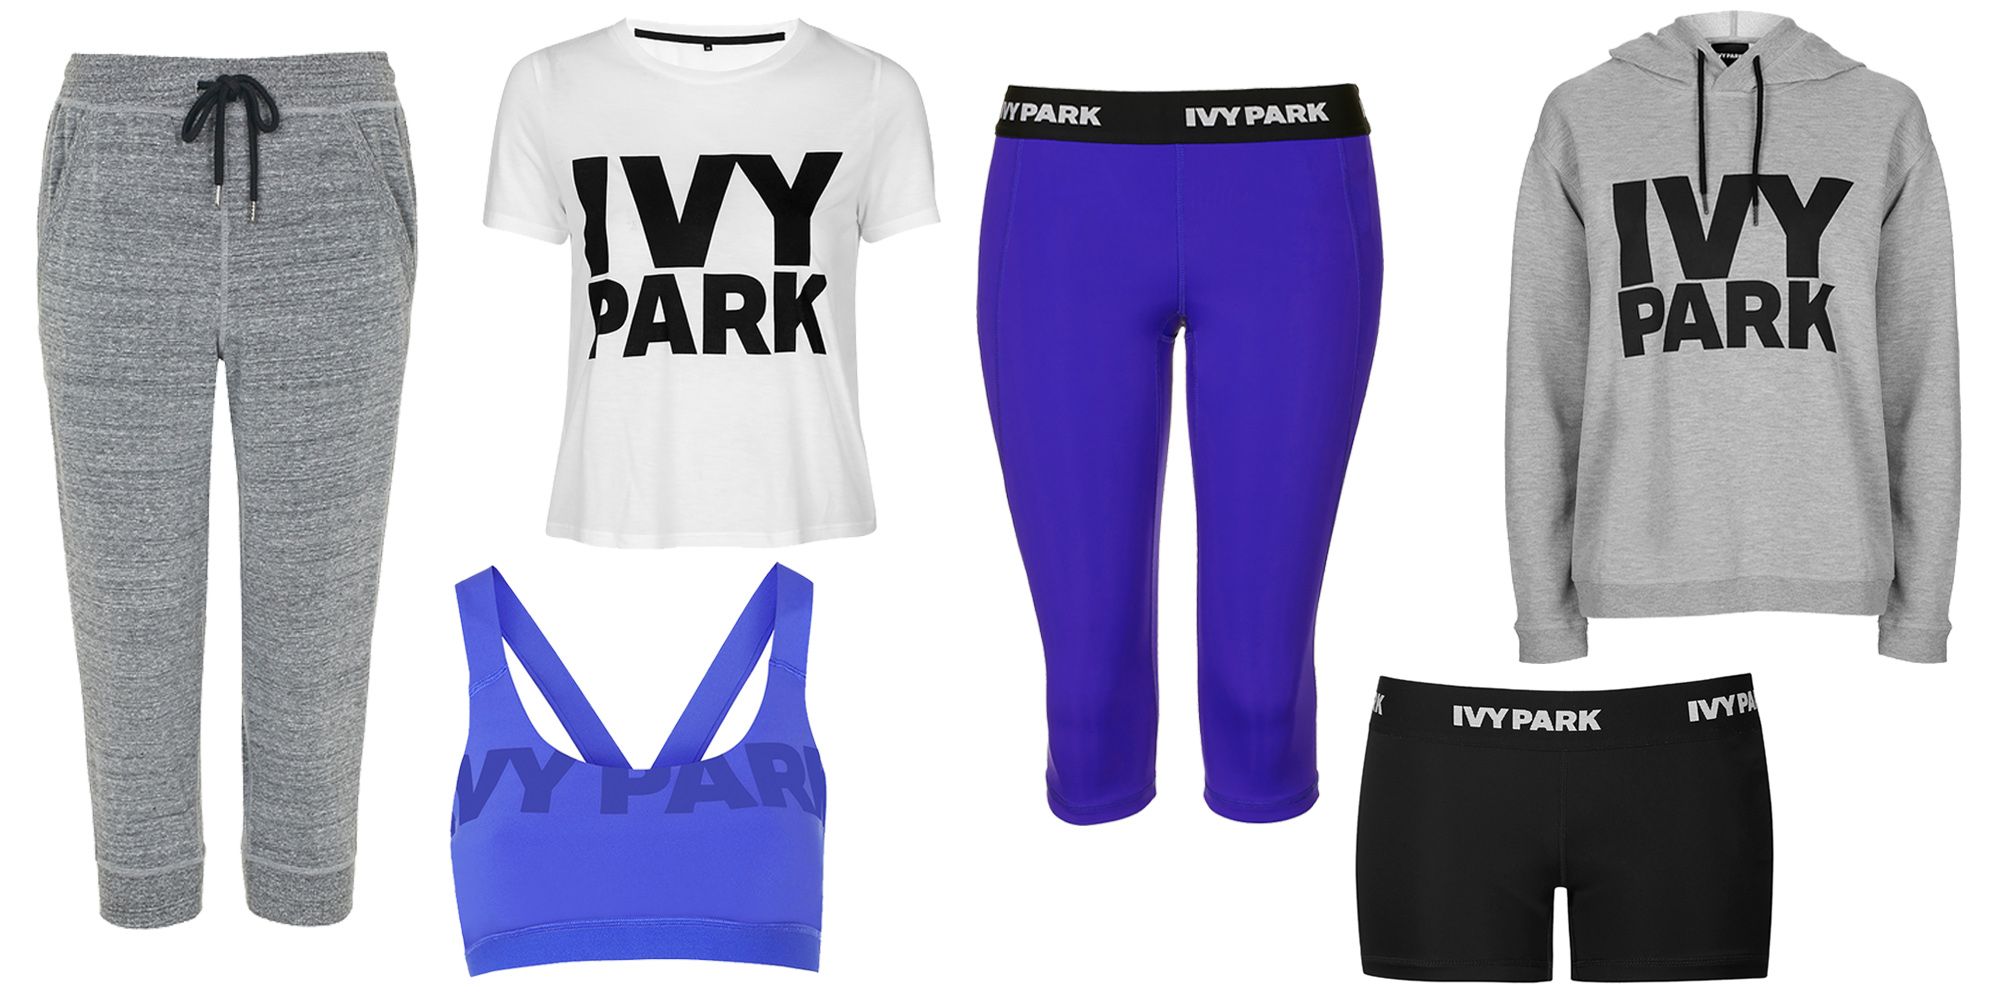 Beyonce Ivy Park Collection - Beyonce 